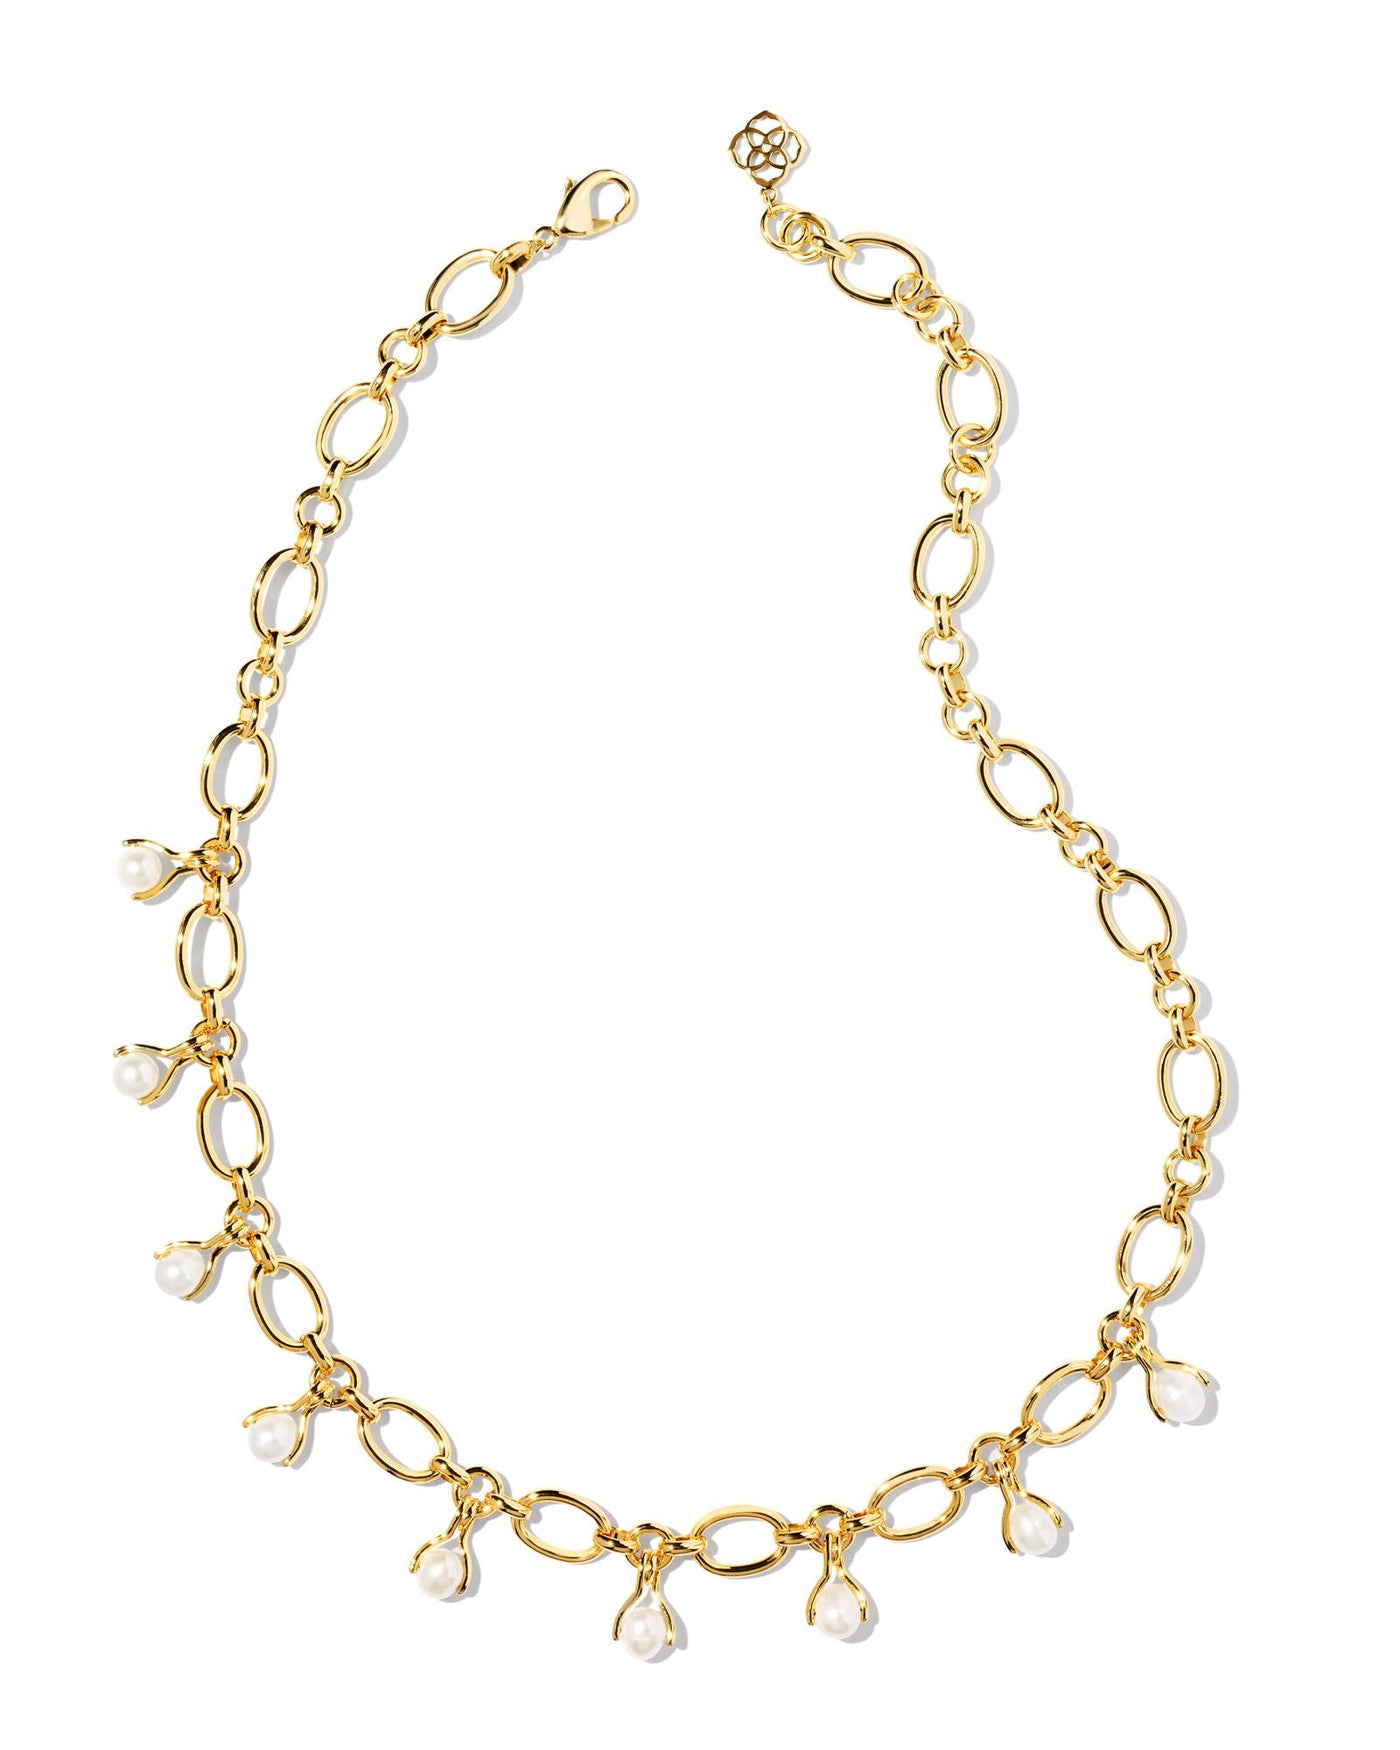 Kendra Scott Ashton Pearl Chain Necklace-Necklaces-Kendra Scott-Market Street Nest, Fashionable Clothing, Shoes and Home Décor Located in Mabank, TX